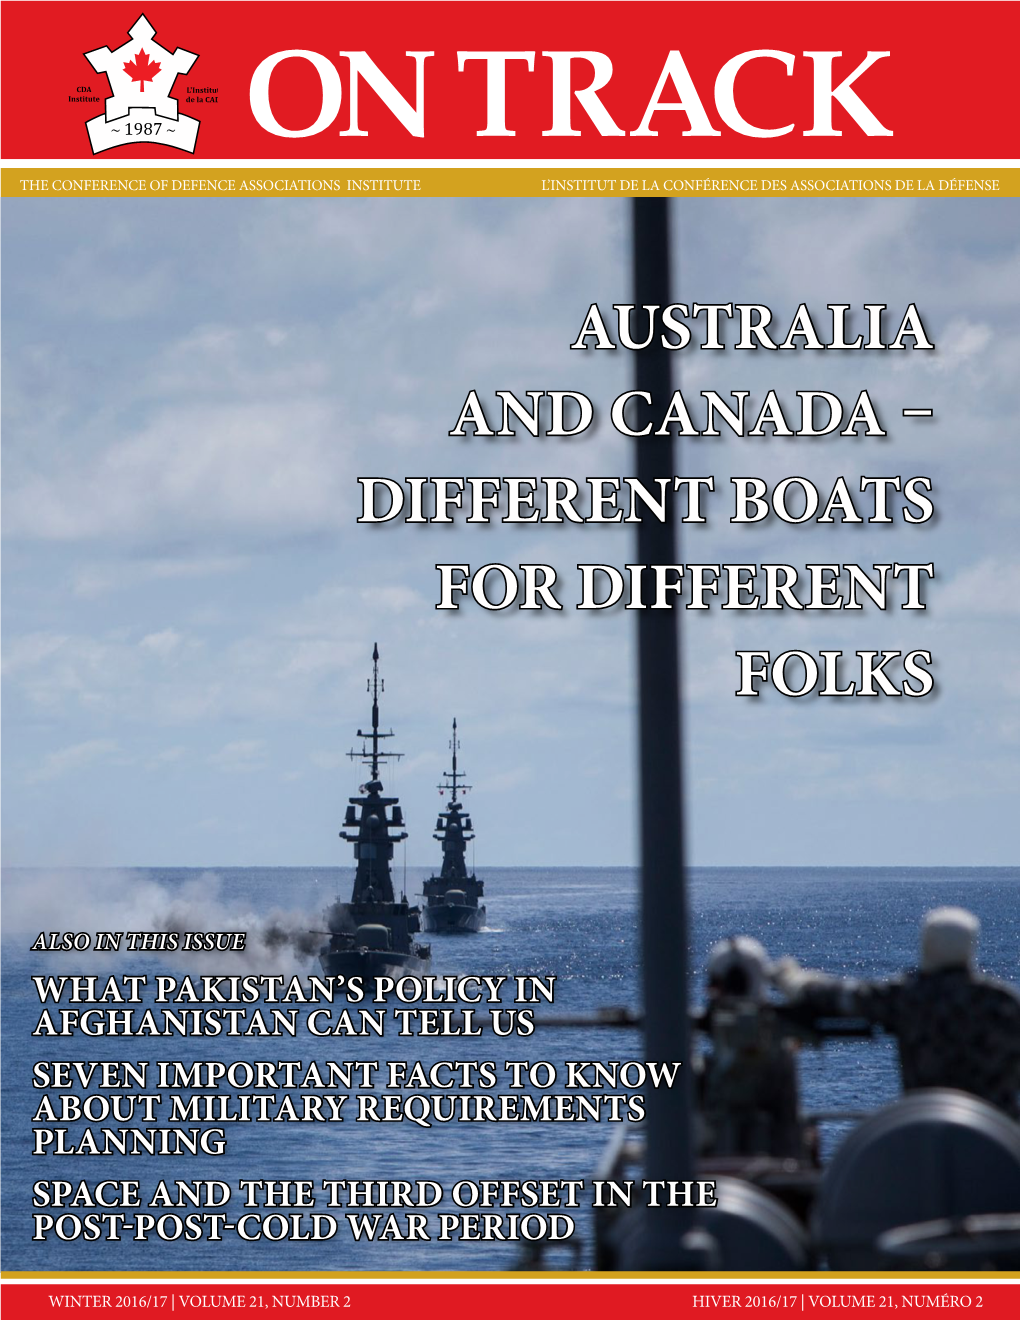 Australia and Canada – Different Boats for Different Folks